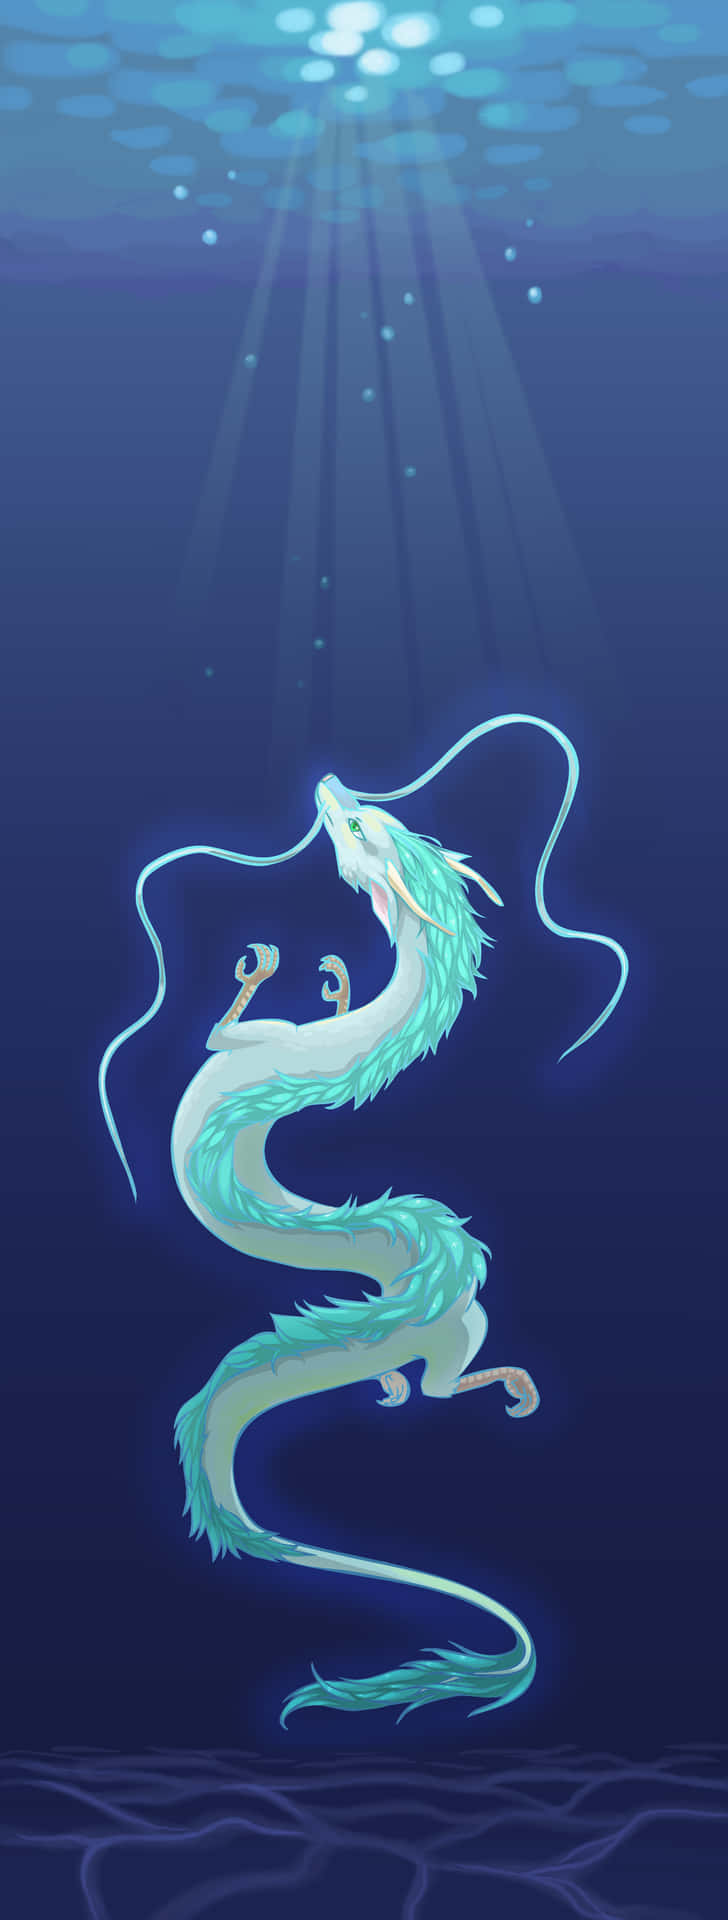 Haku from Spirited Away on your phone with this beautiful wallpaper Wallpaper